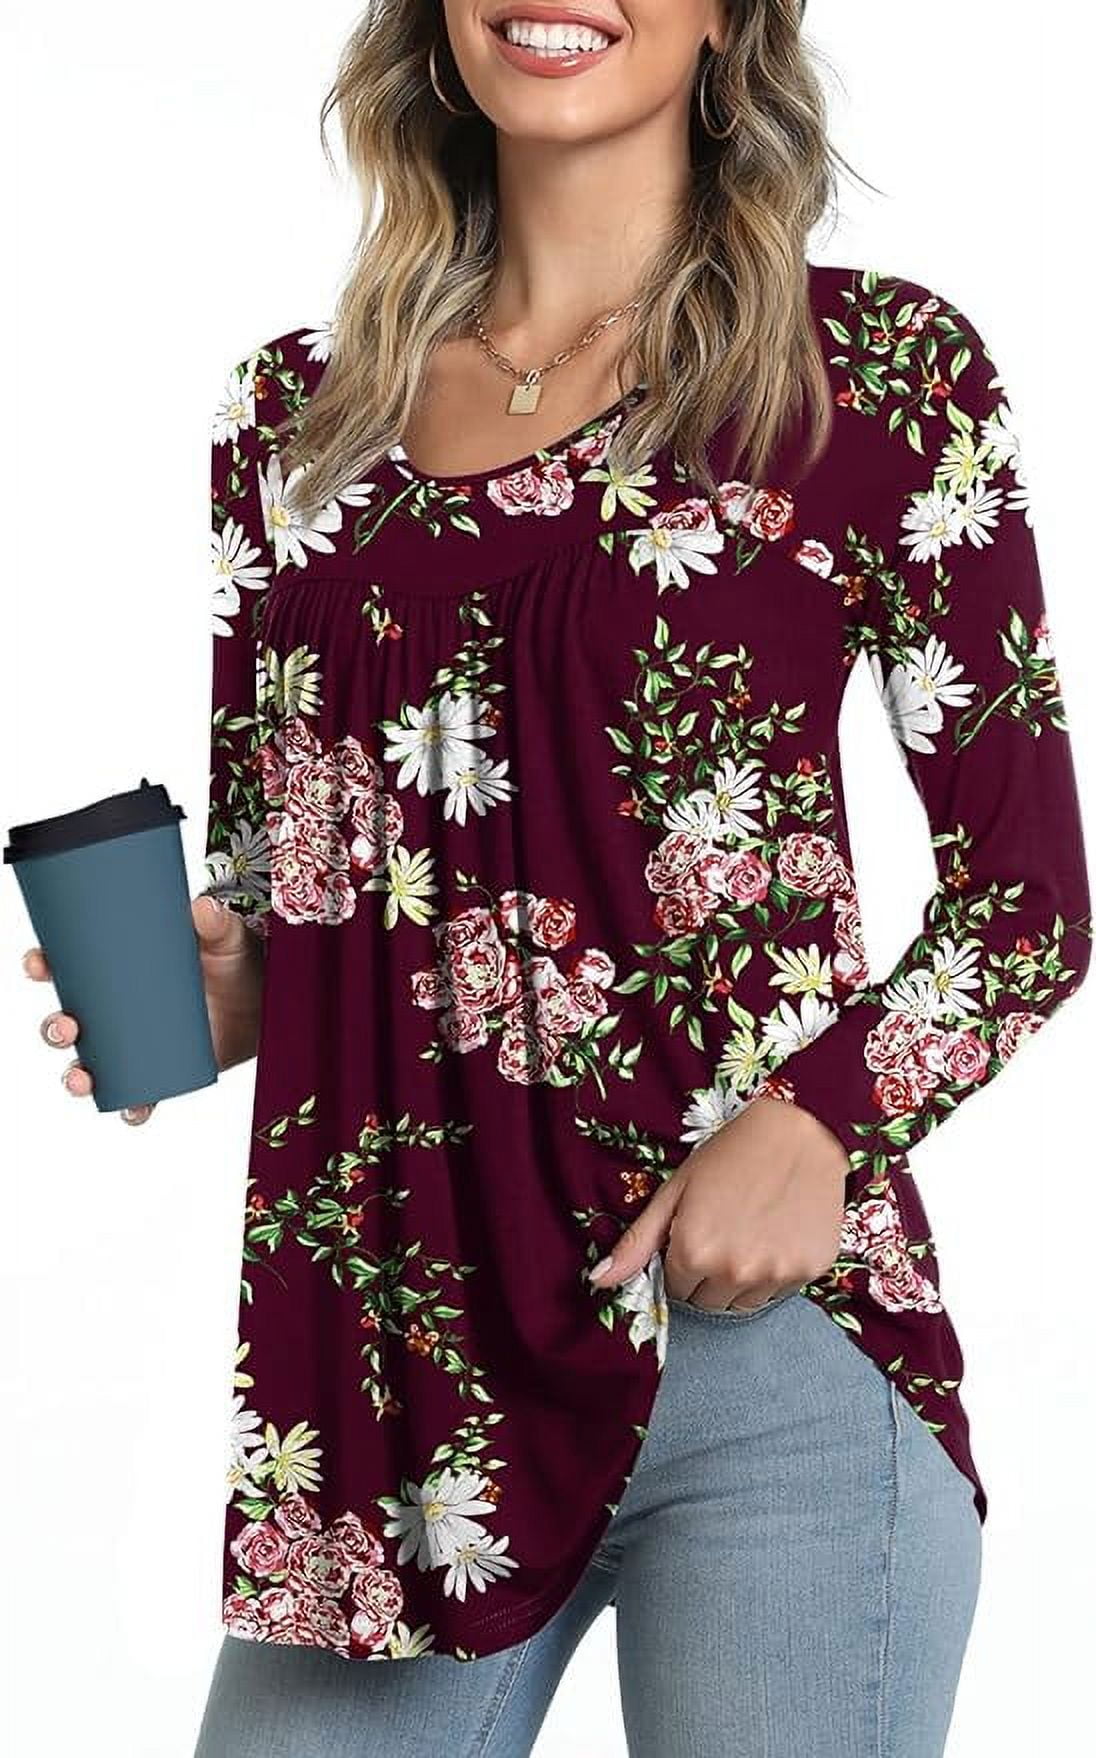  HUMMHUANJ Sweaters for Women Fashion Print Long Casual Flannel  Sweater for Women Long Sleeve Dress Shirt Women Under 20 Dollars Outlet  Deals Overstock Clearance Lime : Clothing, Shoes & Jewelry